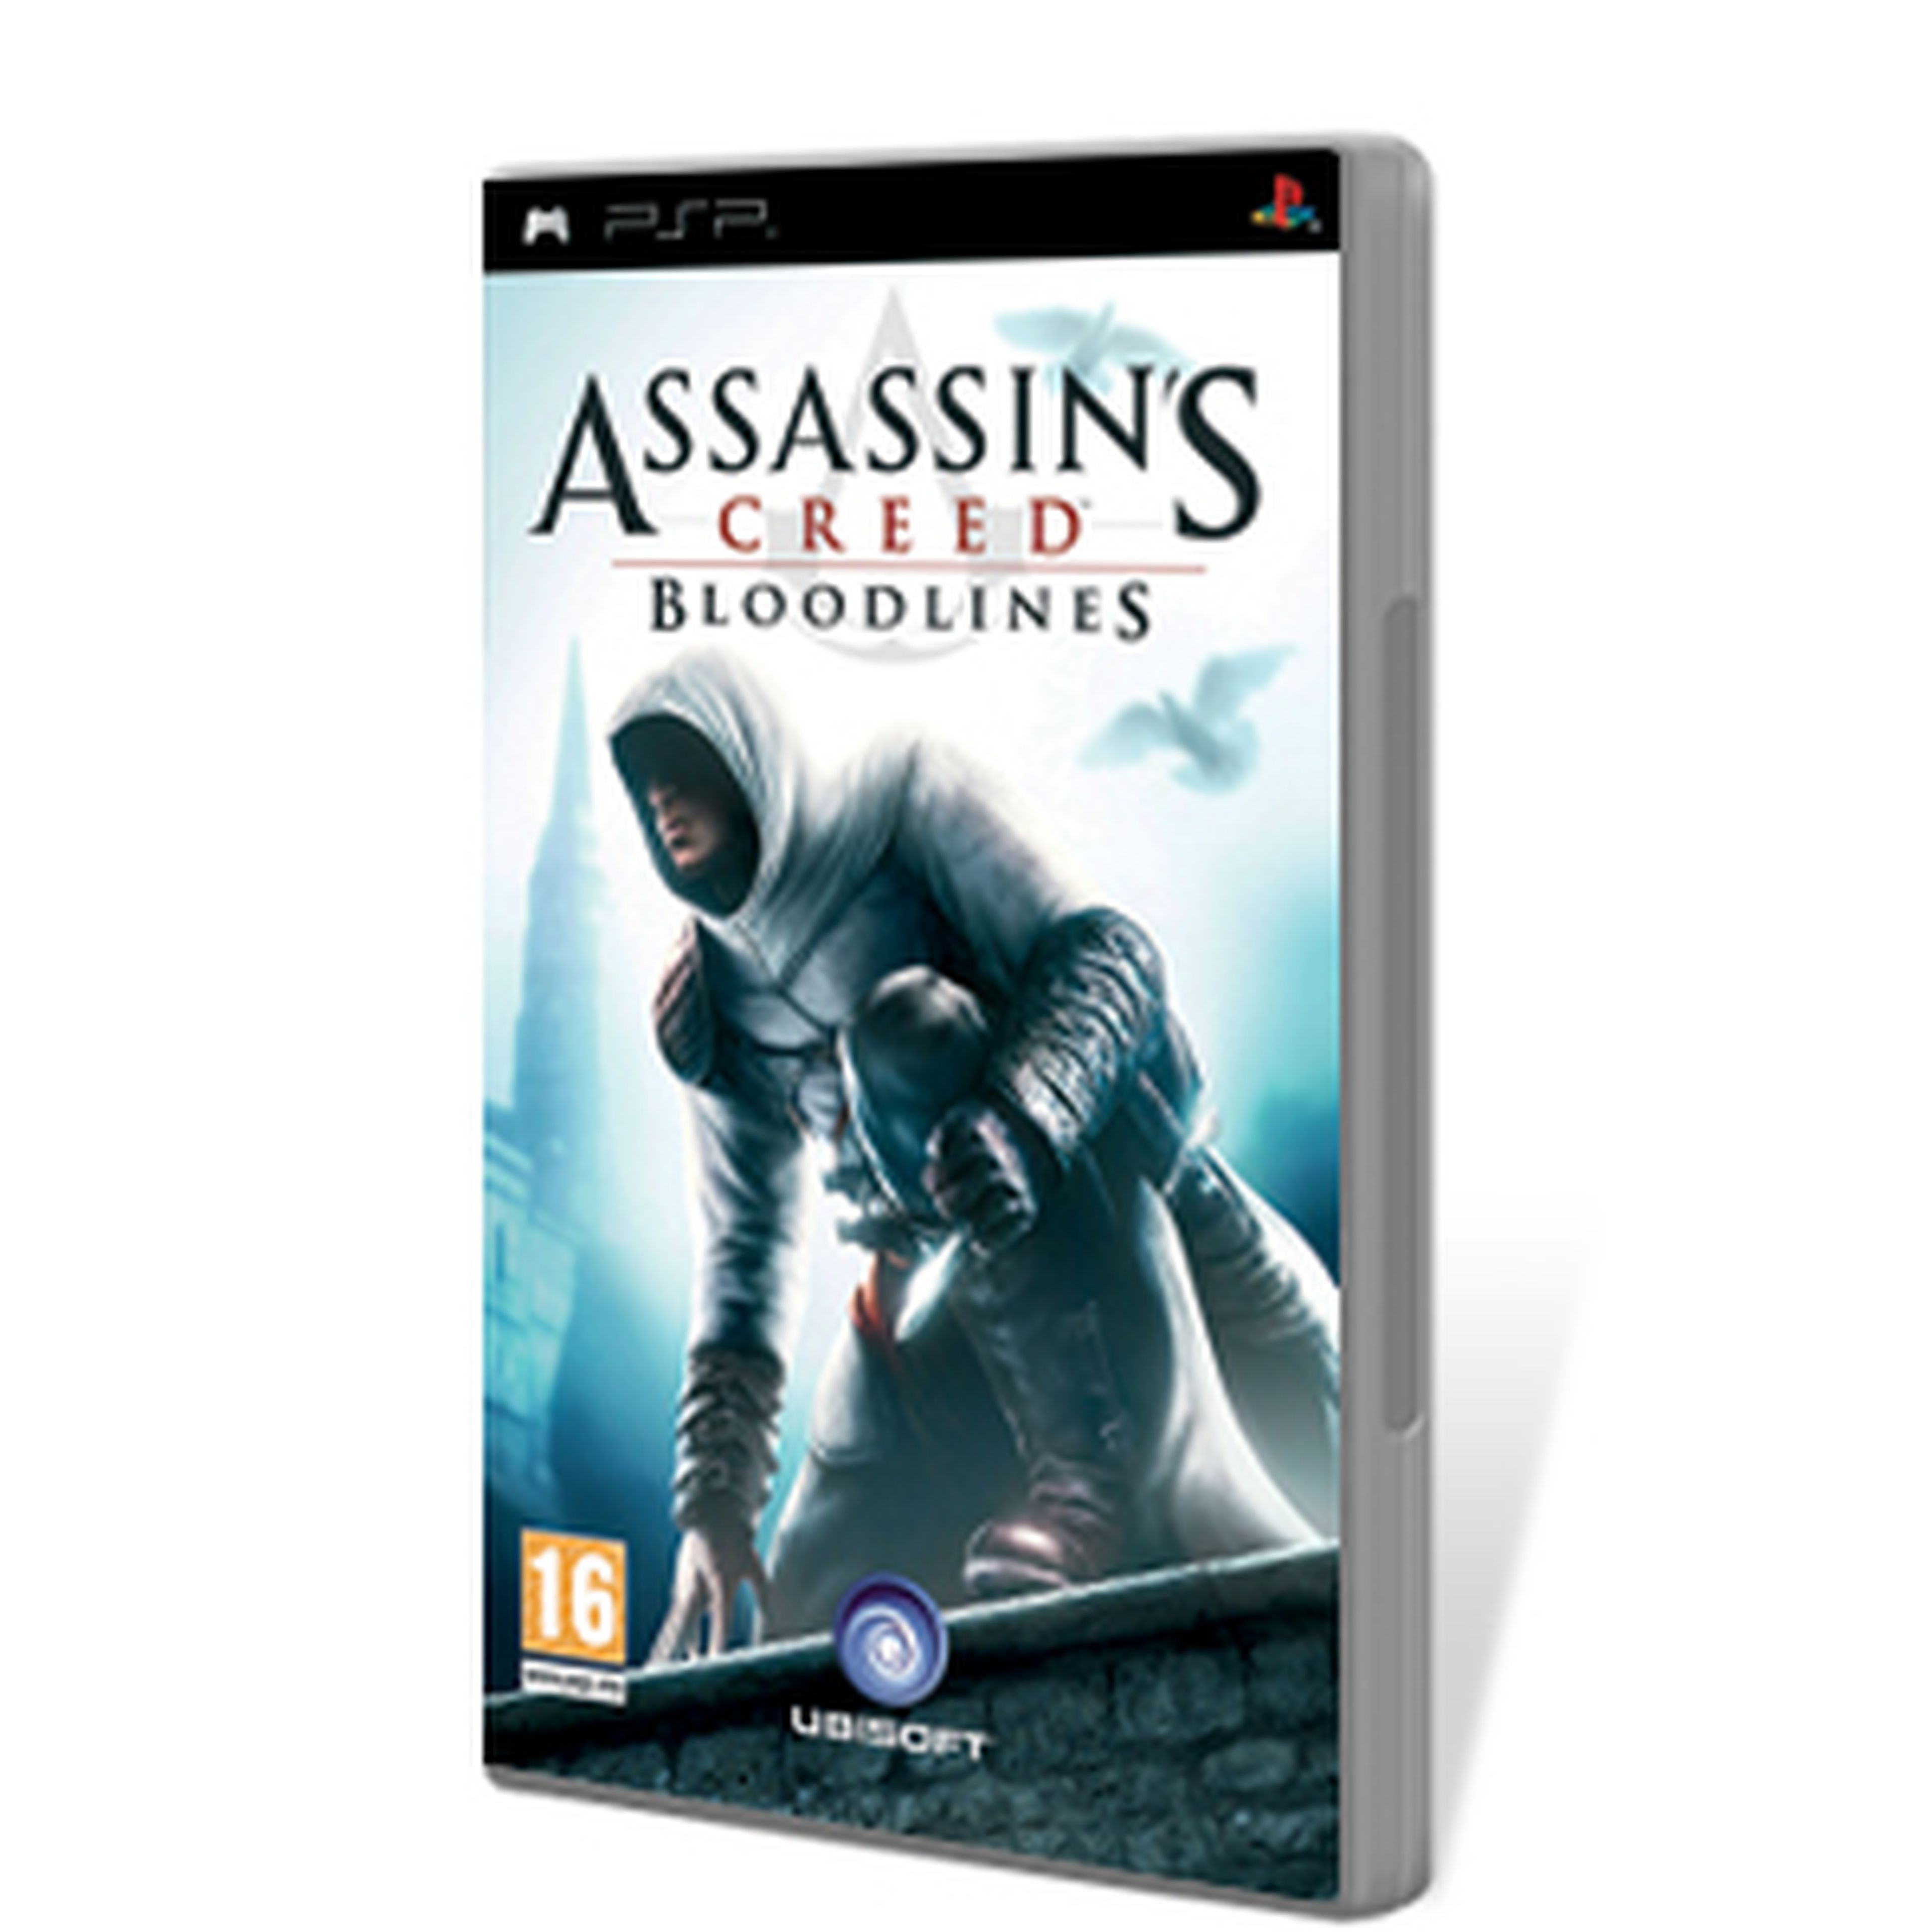 Assassin's Creed Bloodlines para PSP